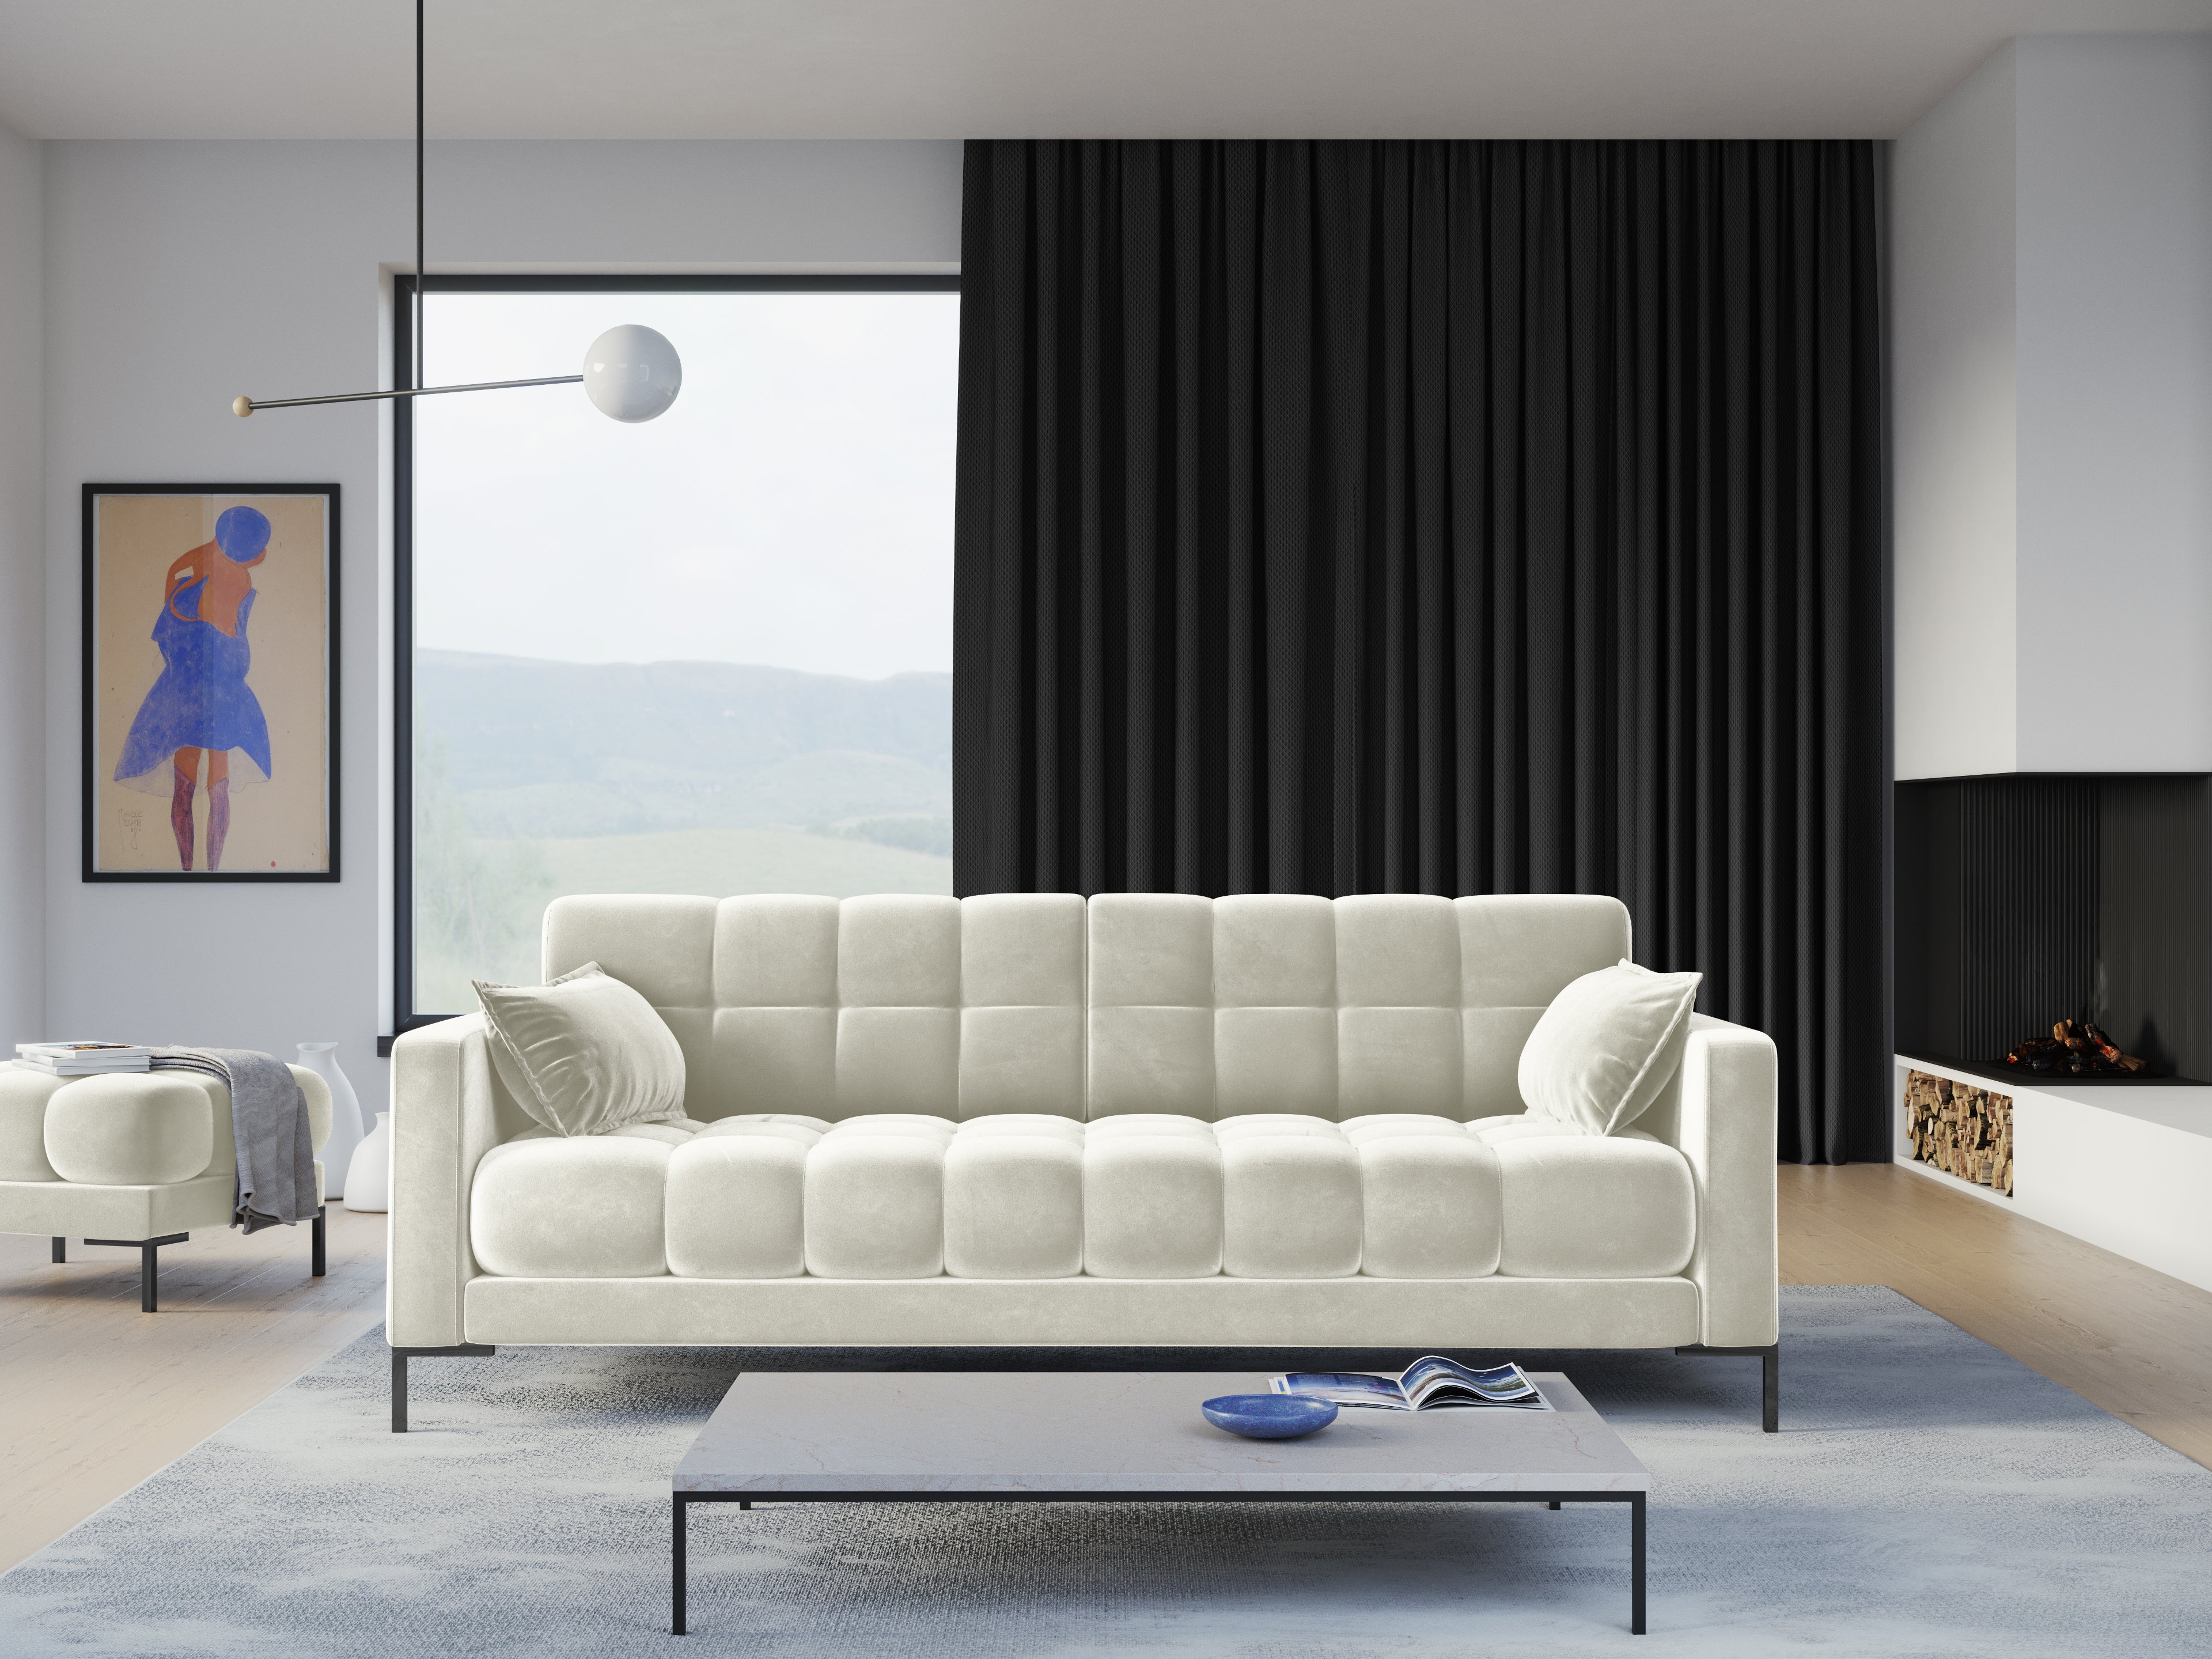 Sofa for commercial spaces